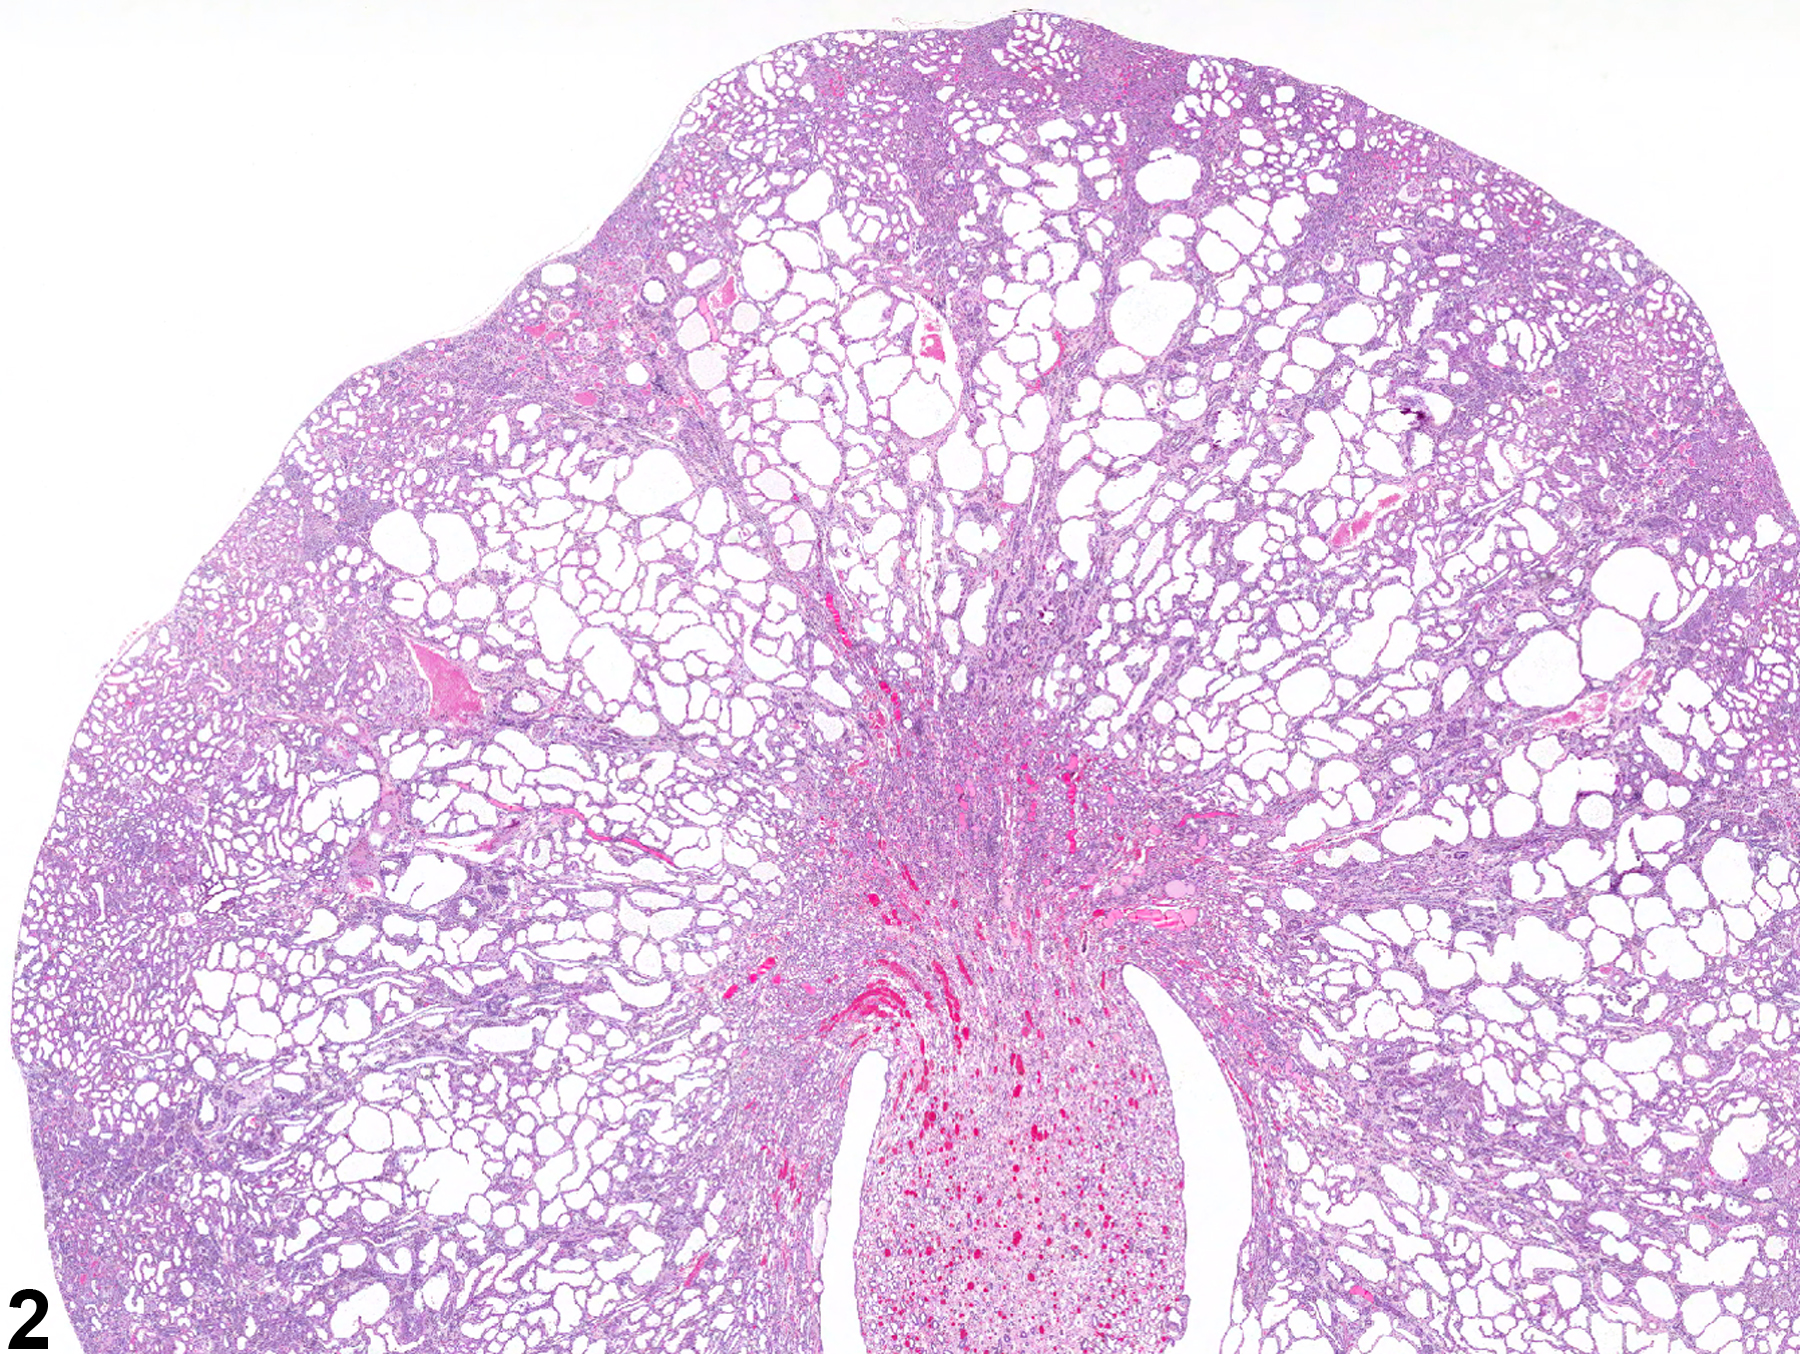 Image of renal tubule dilation in the kidney from a male F344/N rat in a chronic study